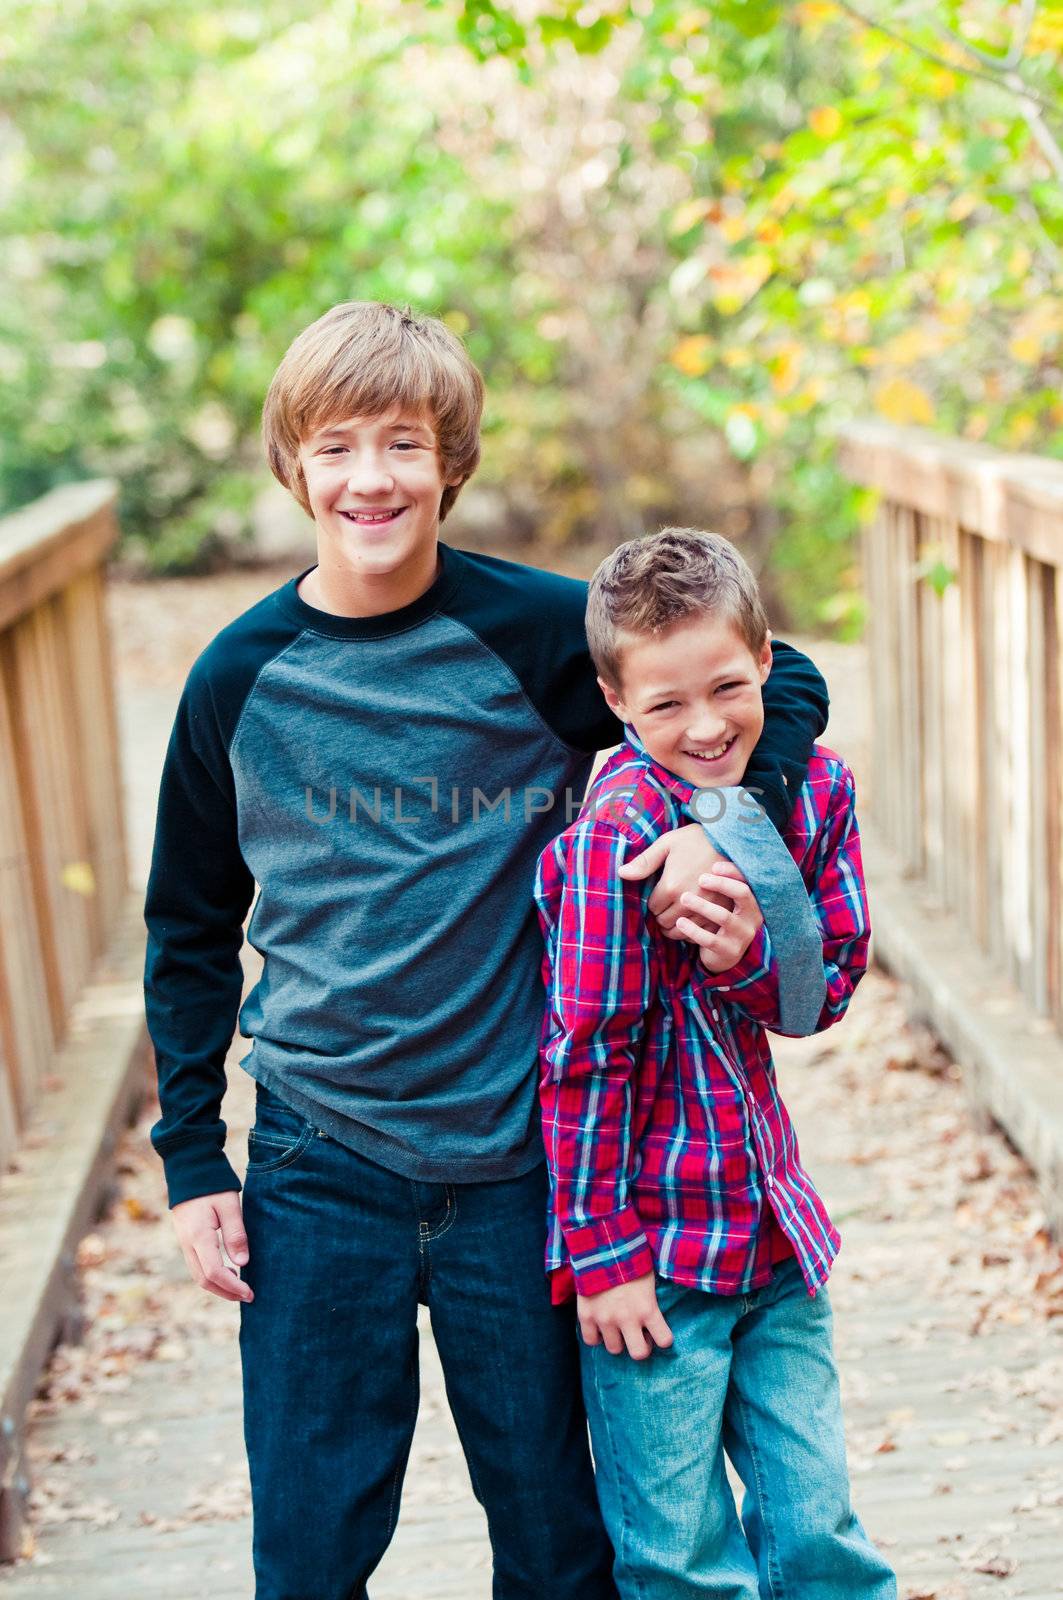 Portrait of brothers with older boy tickling younger boy on a bridge outdoors.